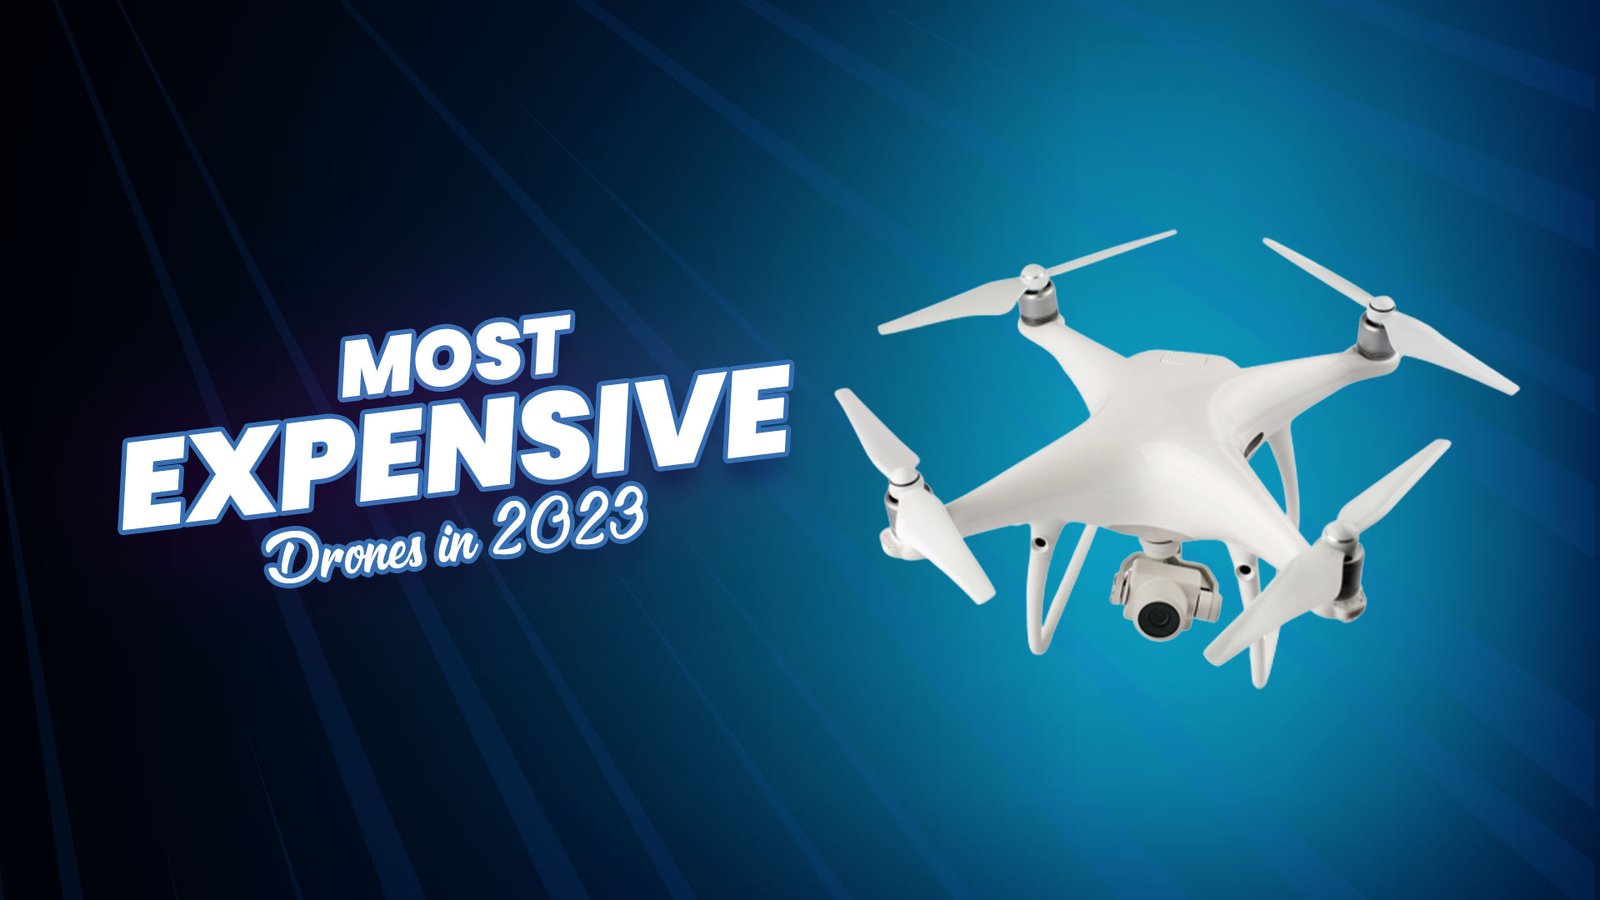 Most Expensive Drones in 2023